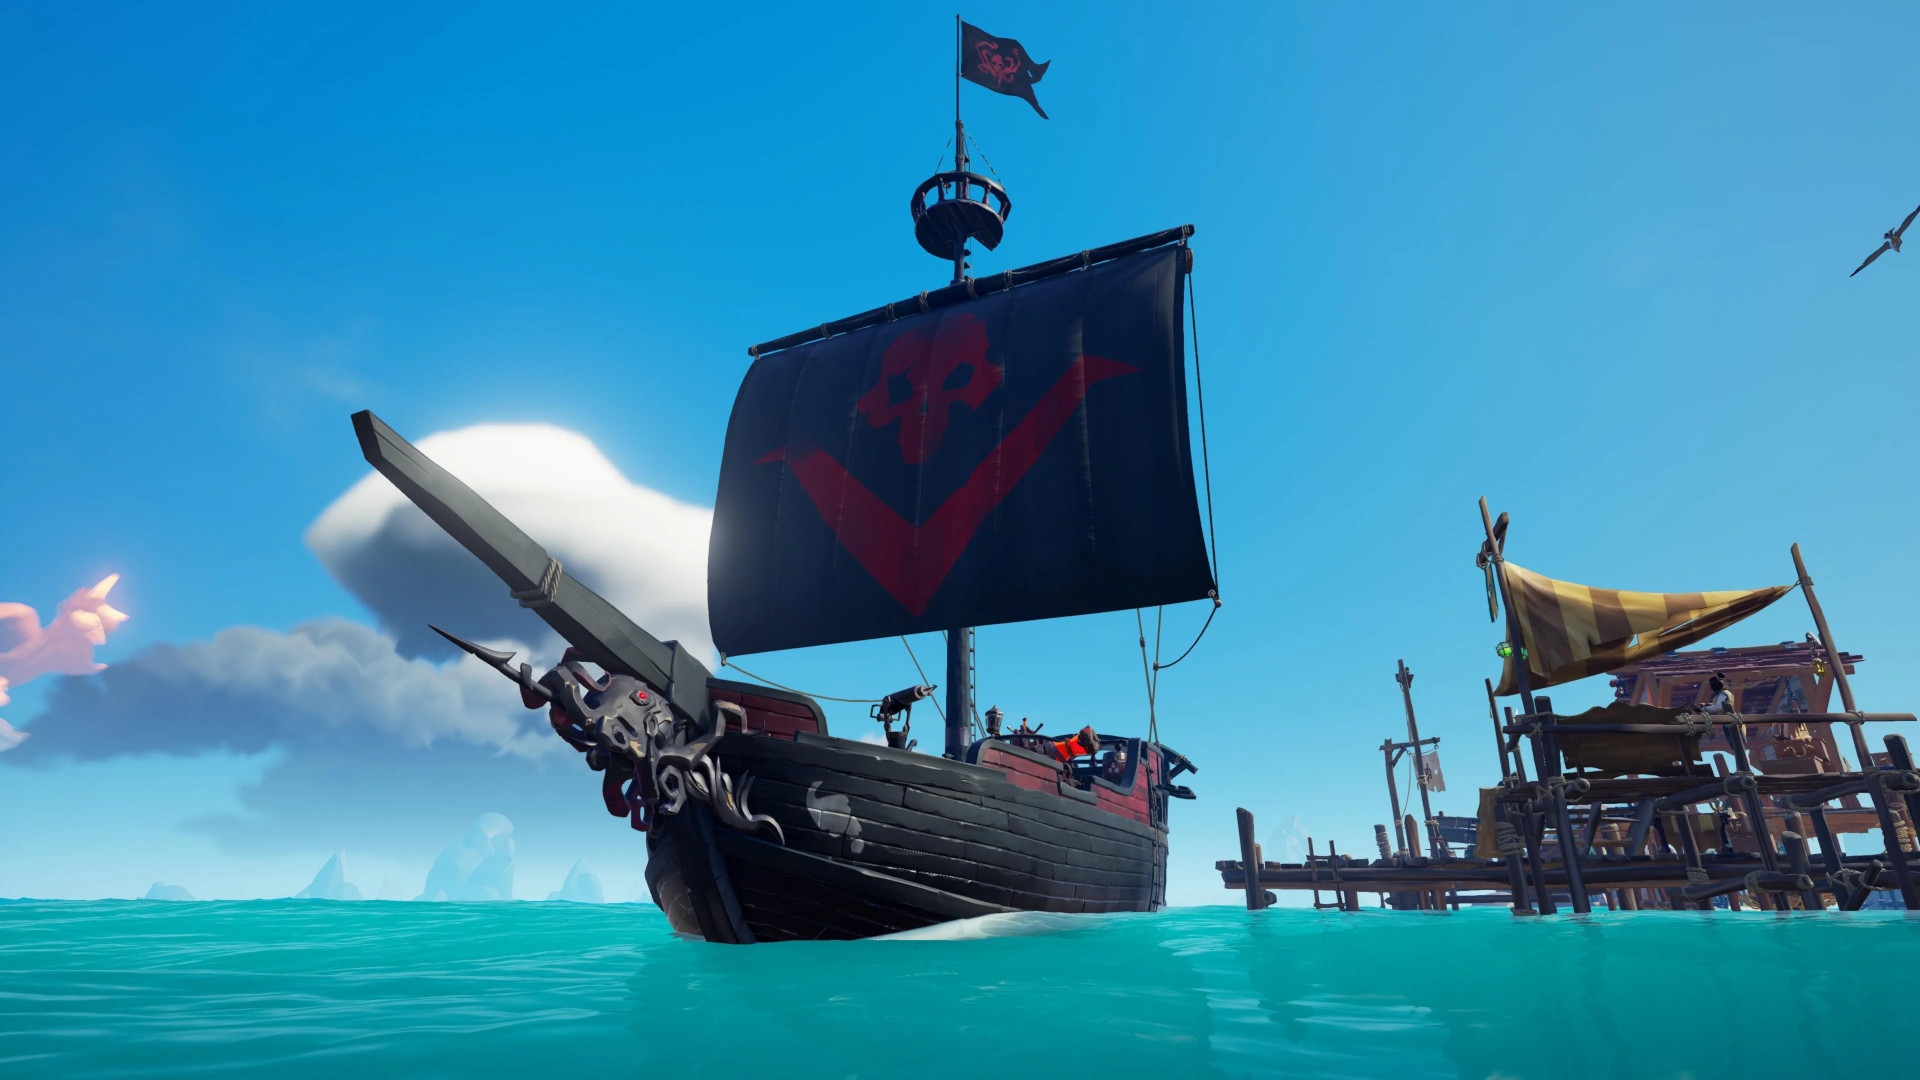 Sea of Thieves - Sails of the Bonny Belle DLC XBOX One / Windows 10 CD Key (89.27$)